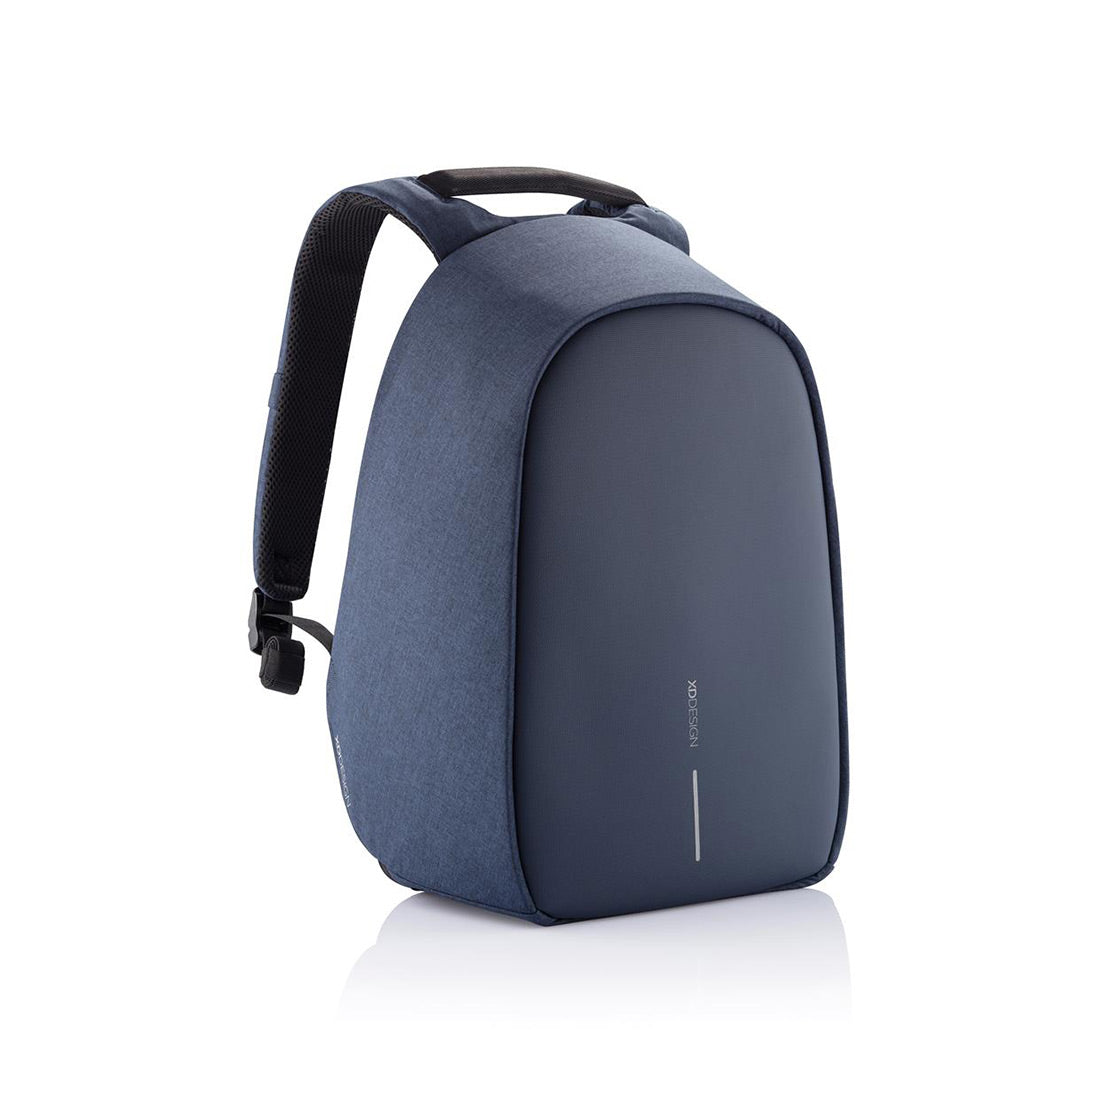 XDDESIGN Aanti Theft Backpack With-RPET-Material Navy Blue